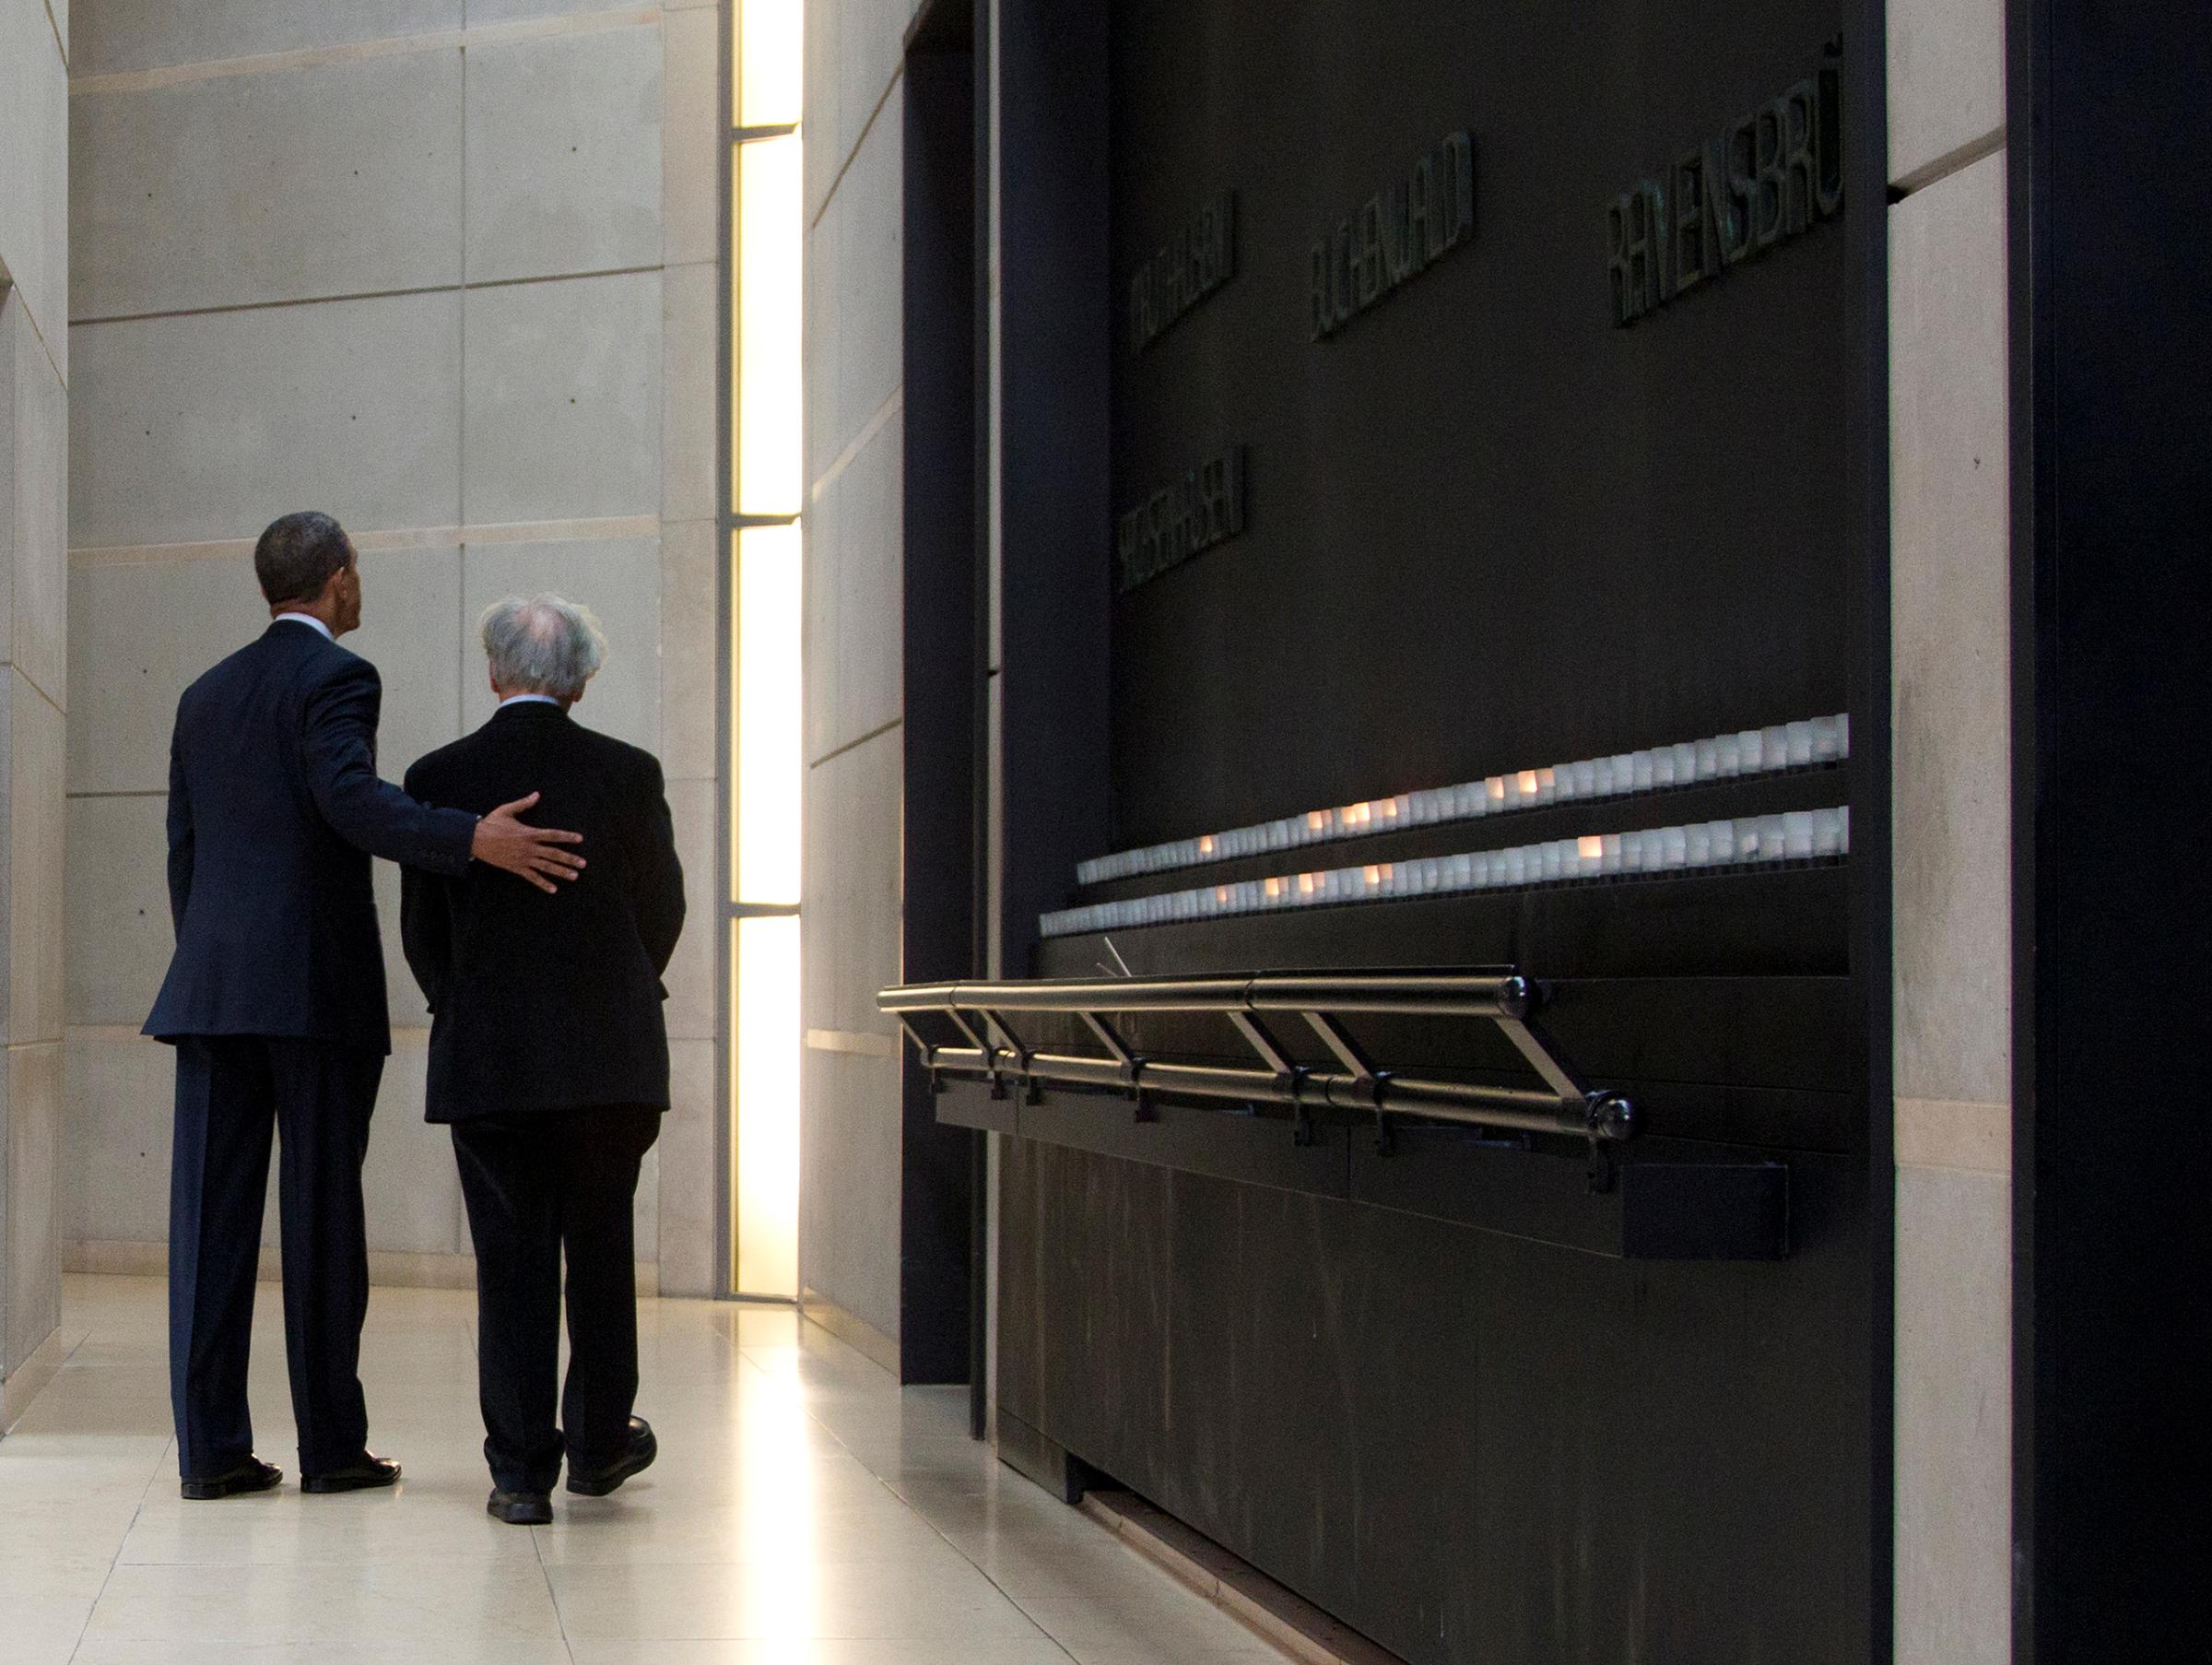 President Barack Obama and Nobel Peace Prize laureate and Holocaust survivor Elie Wiesel turn to leave after lighting candles in the Hall of Remembrance as they tour the Holocaust Memorial Museum in Washington on April 23, 2012.